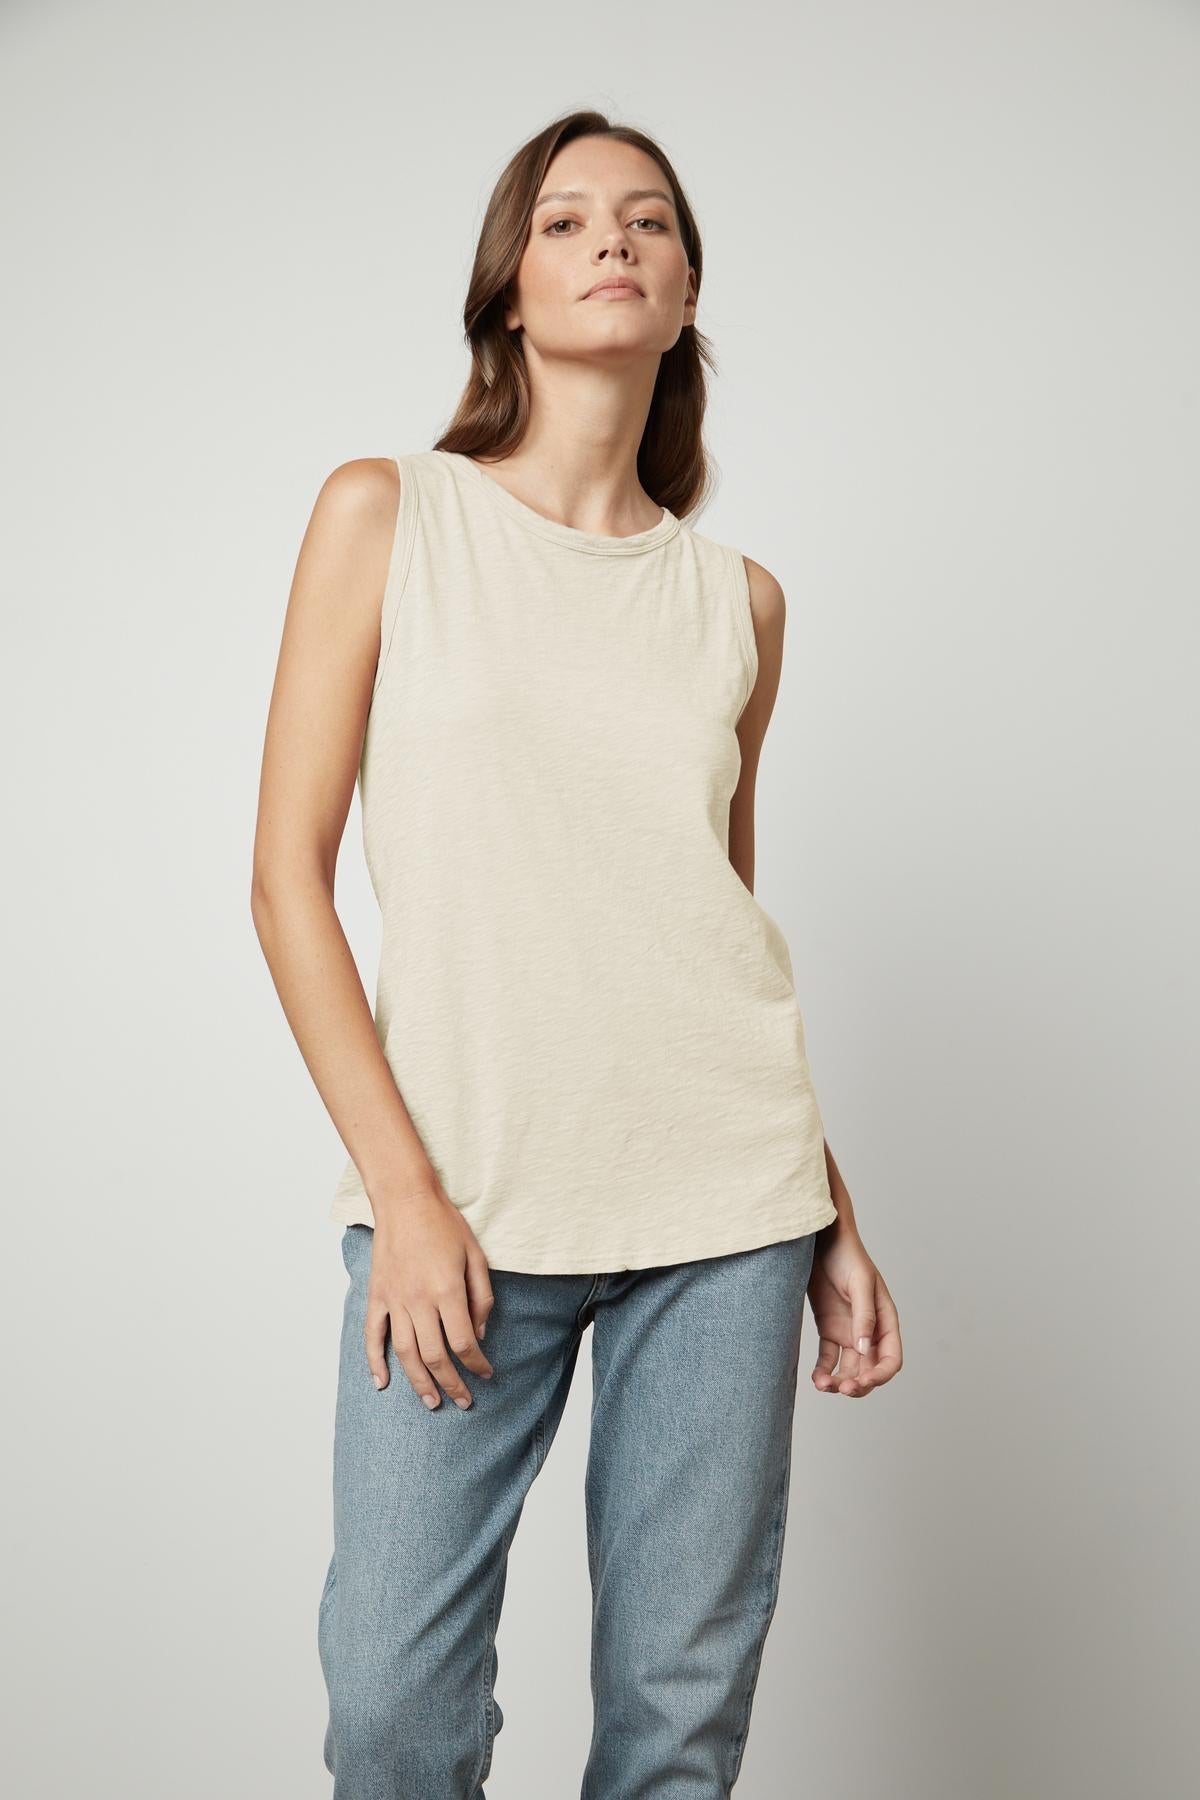   The model is wearing a TAURUS COTTON SLUB TANK by Velvet by Graham & Spencer and jeans. 